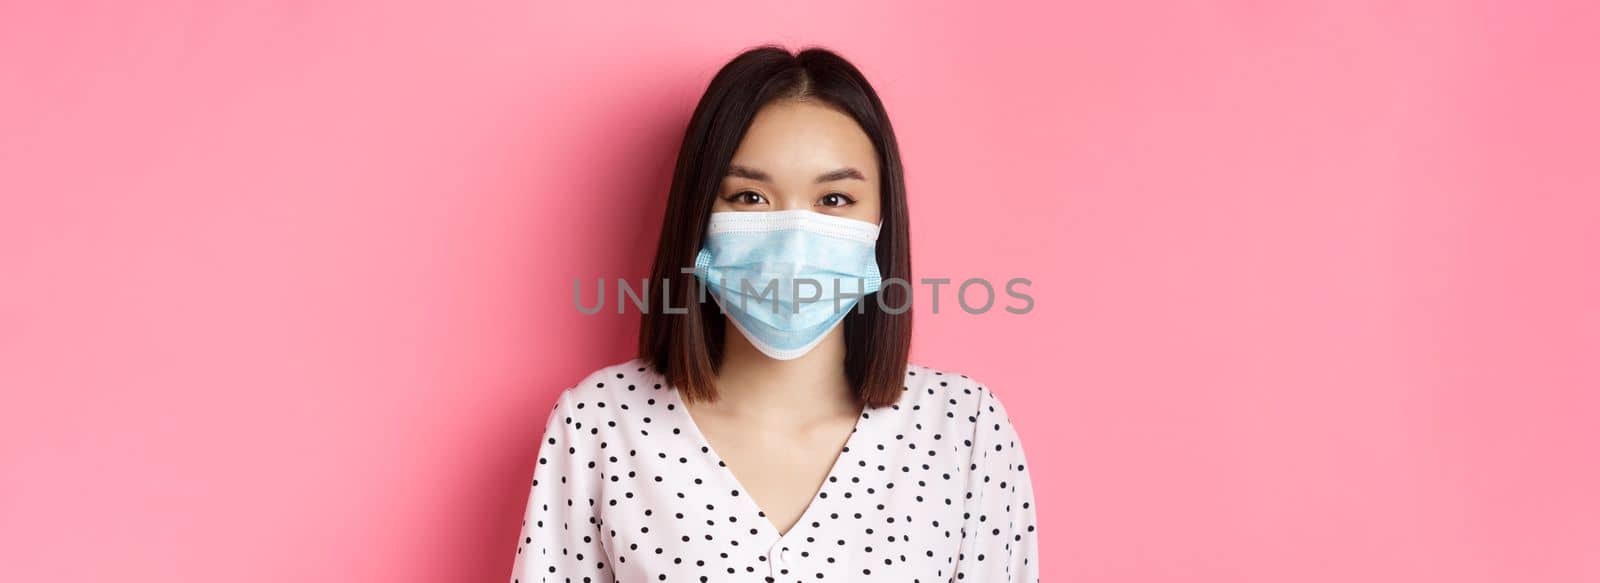 Covid-19, pandemic and lifestyle concept. Close-up of beautiful asian woman in face mask smiling with eyes, wearing protection from coronavirus in public, pink background.